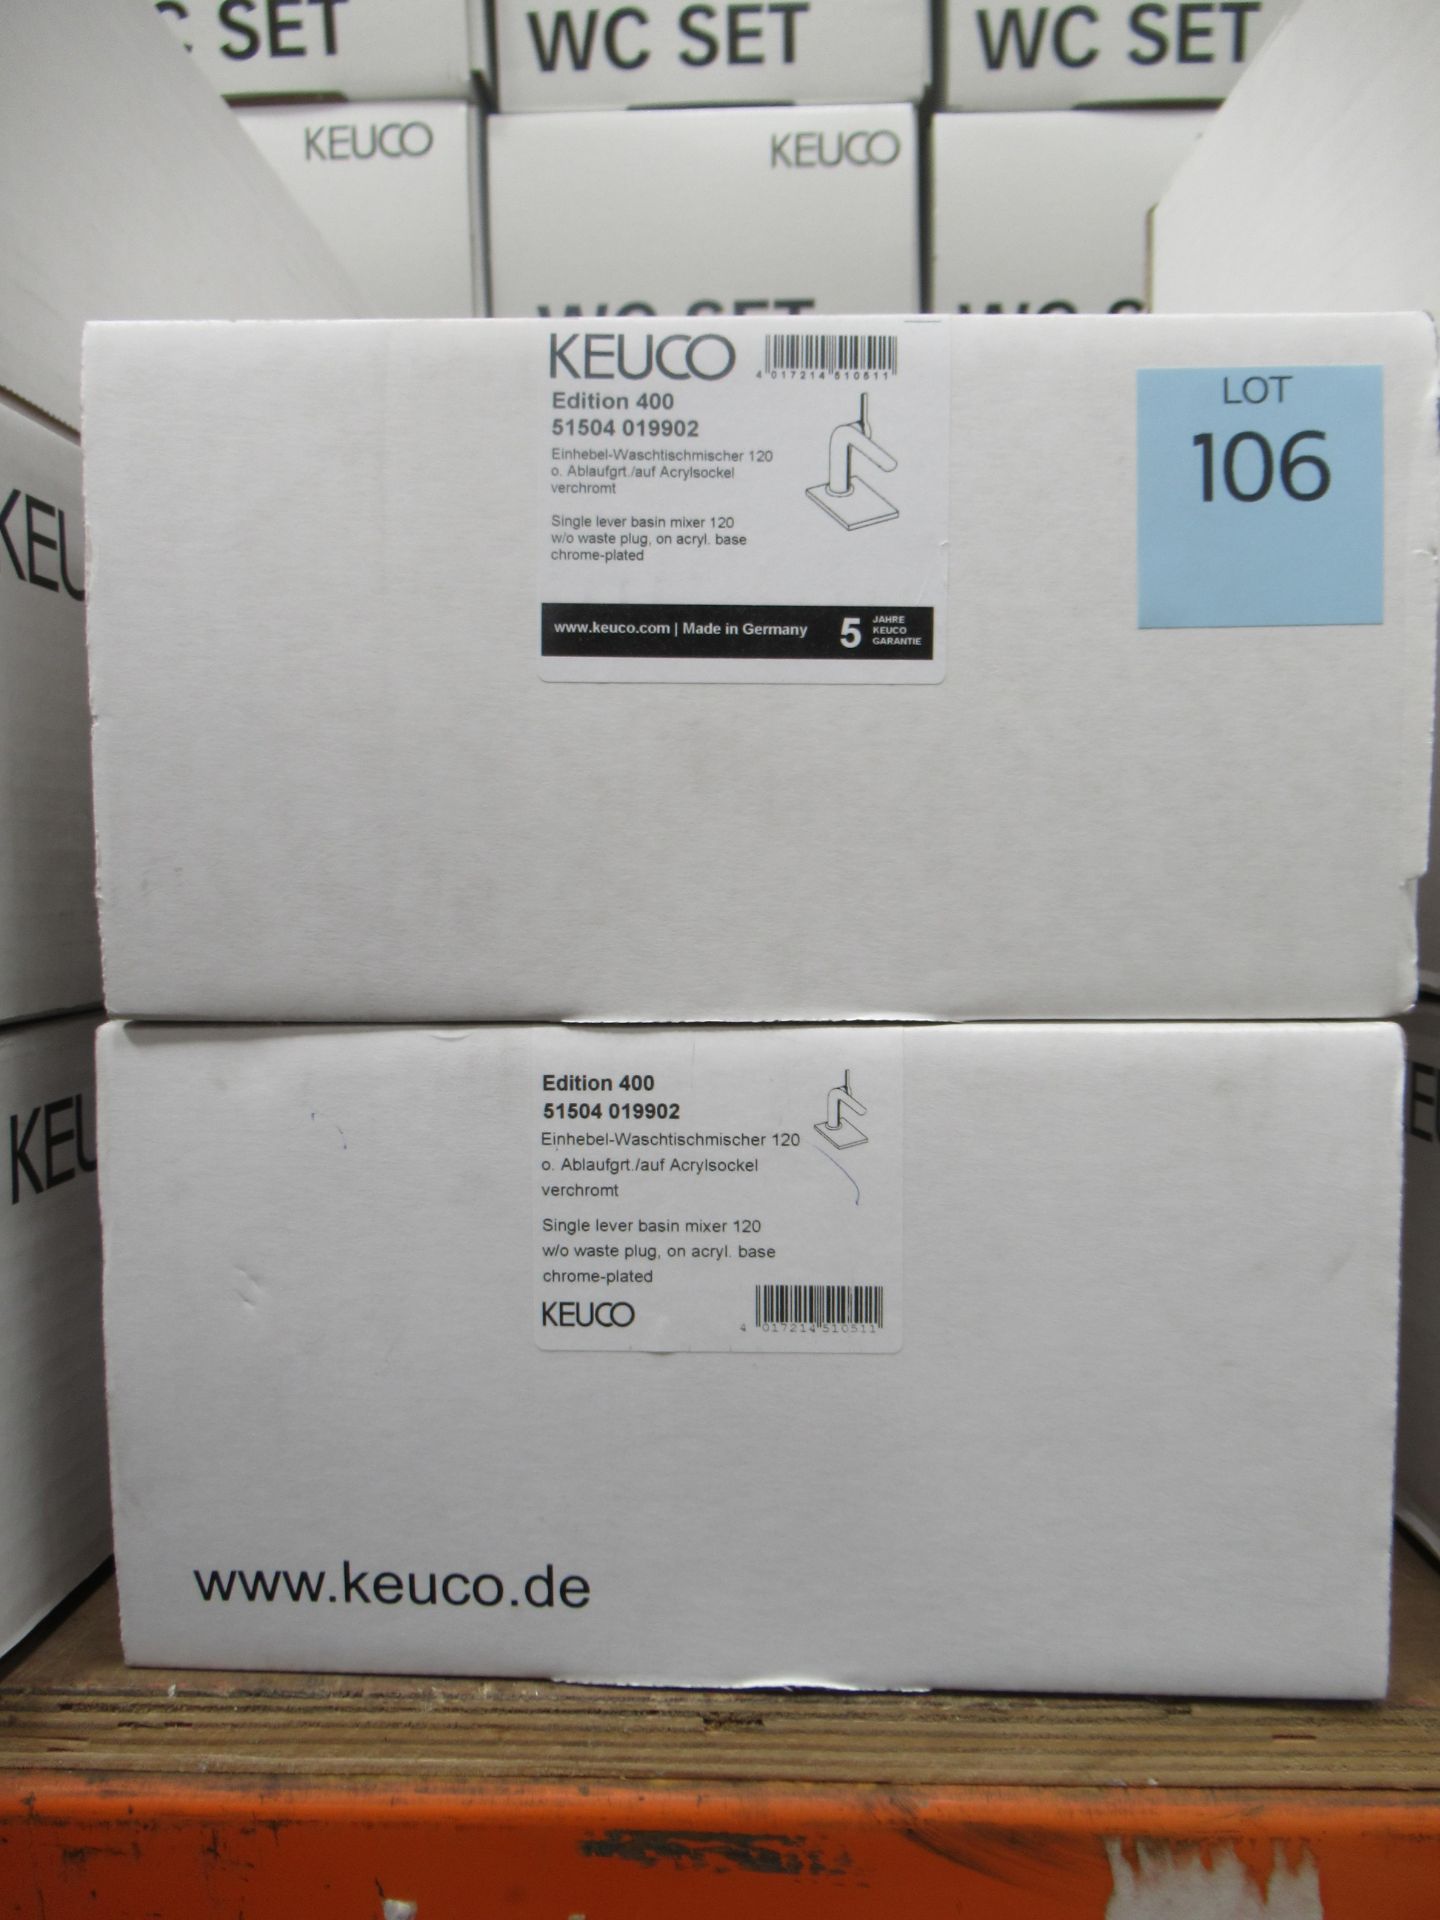 2 x Keuco Edition 400 Single Lever Basin Mixer 120- Tap, Chrome Plated, P/N 51504-019902